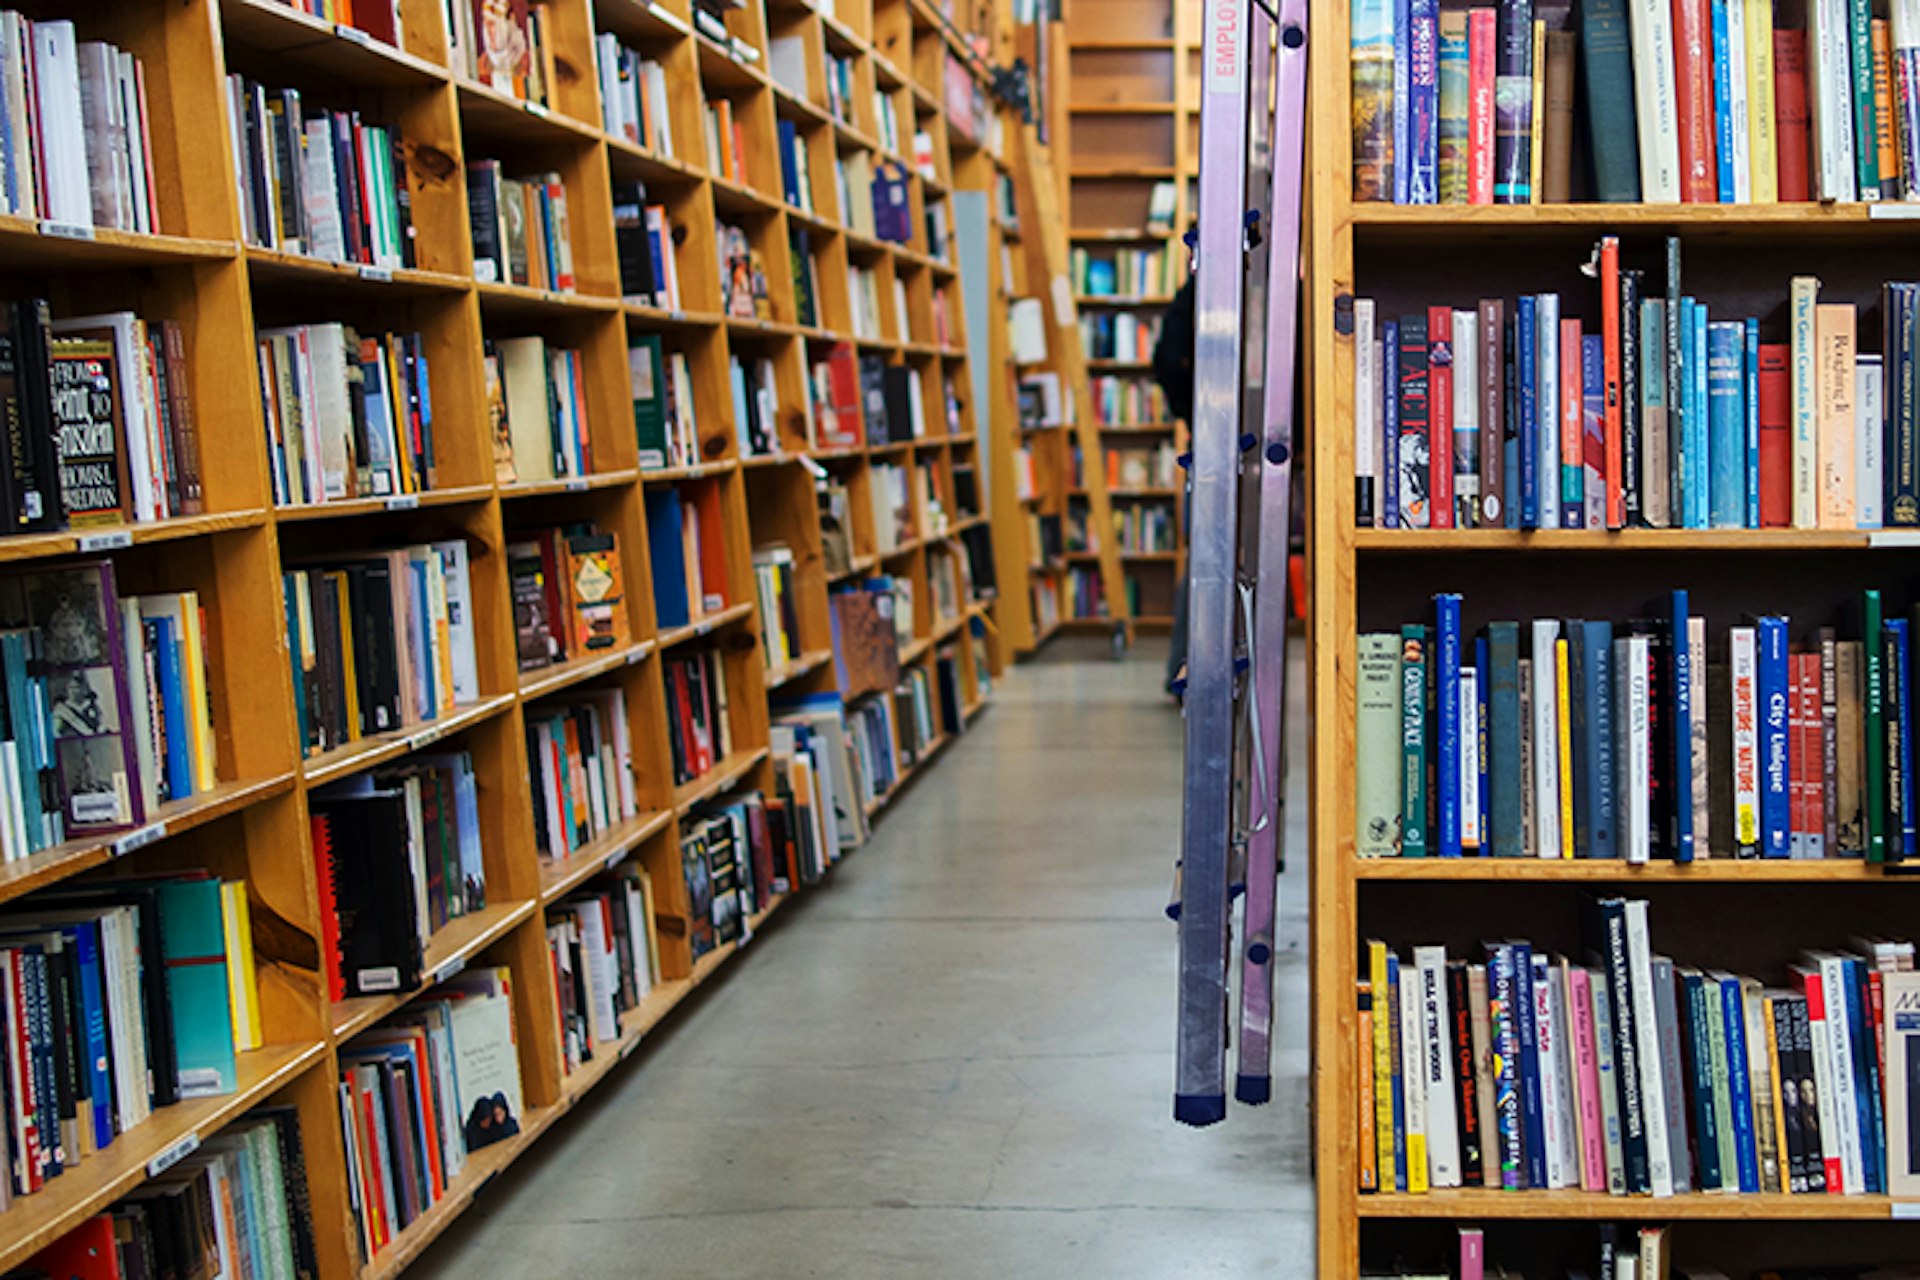 Powell's City of Books is said to be the largest new and used bookstore in the world. Image by Kenny Louie / CC BY 2.0